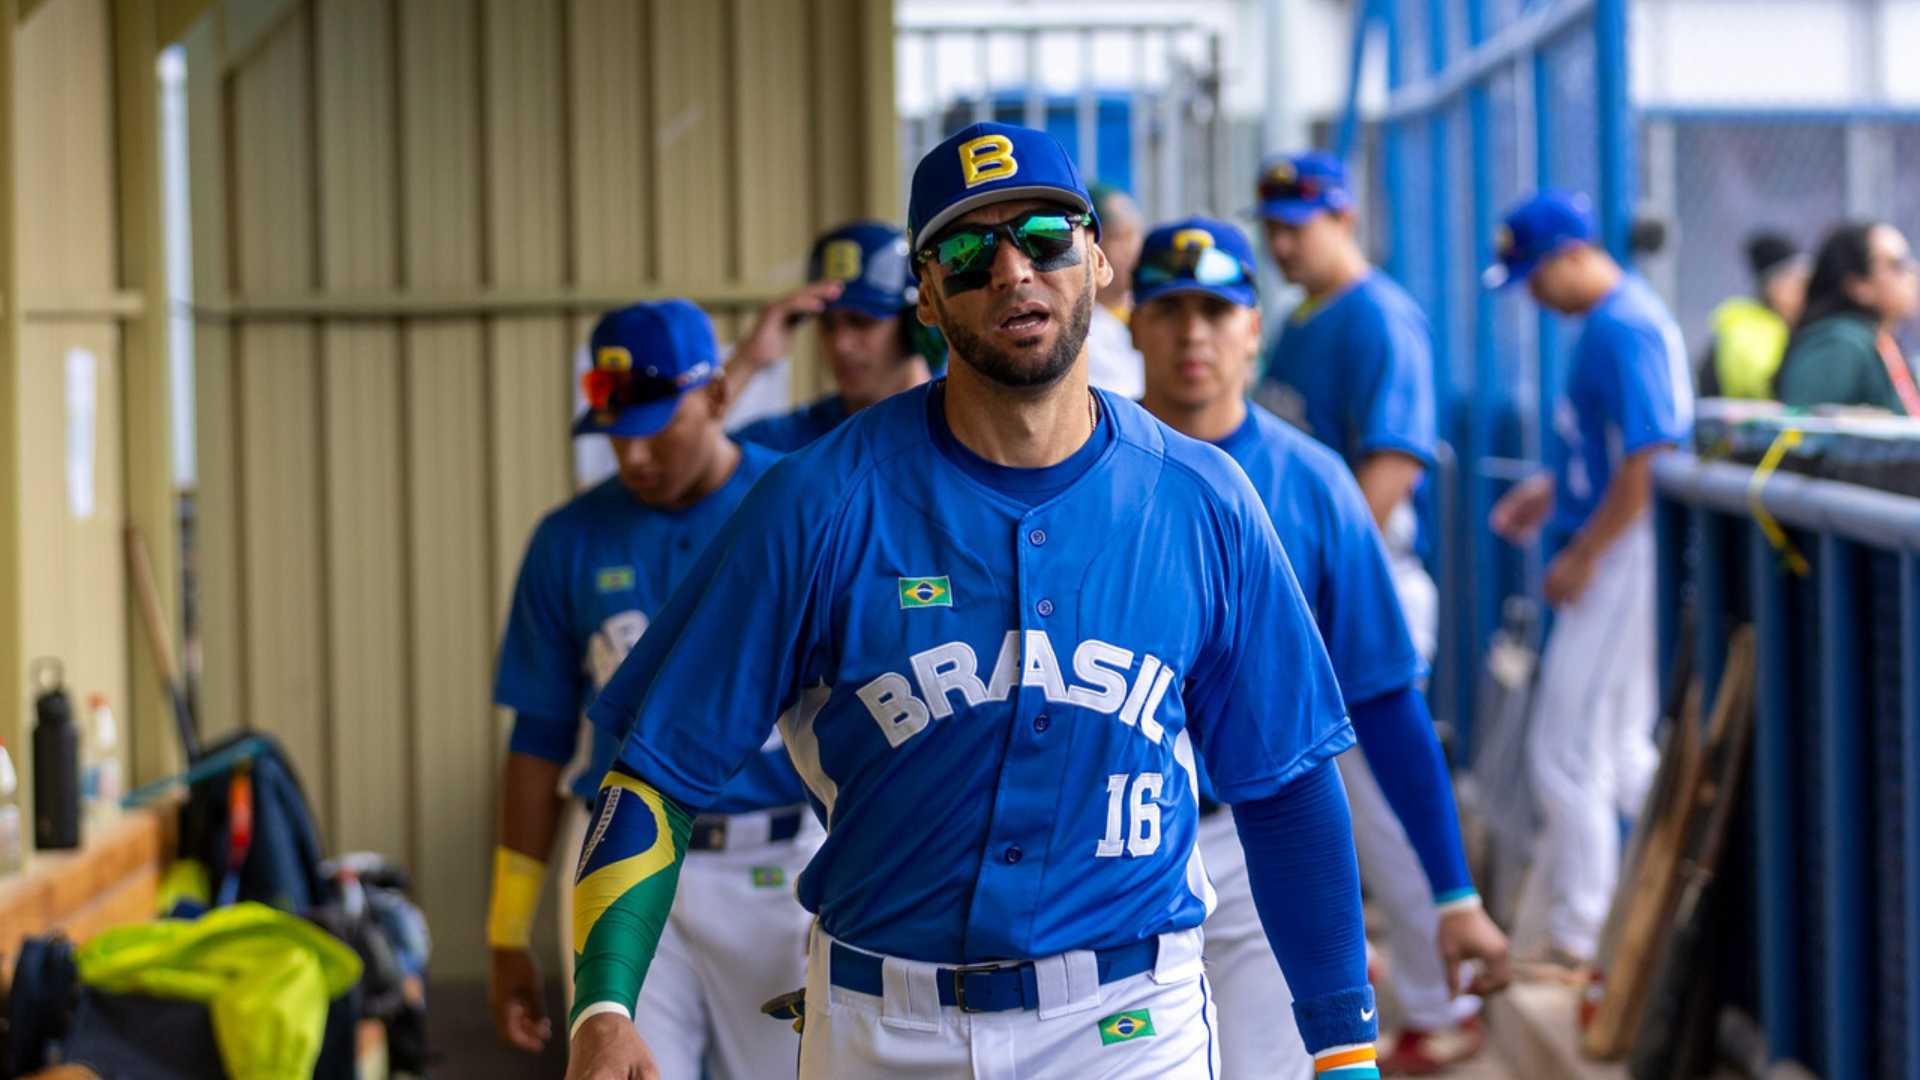 Brazil defeated Cuba and advanced as the leader to the Super Round of baseball